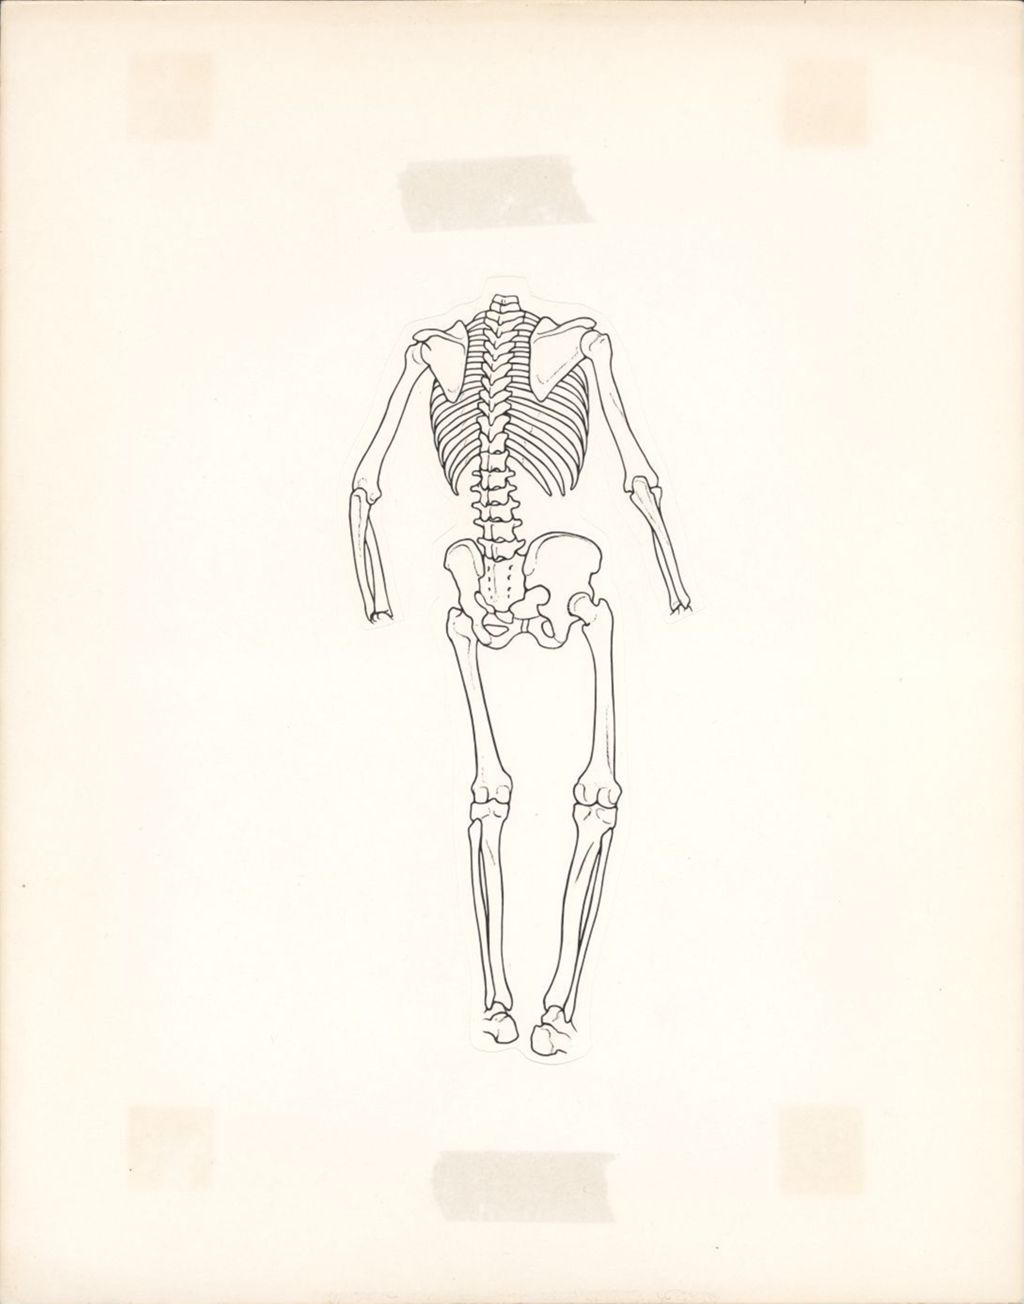 Miniature of Artwork of posterior view of skeleton, missing hands, feet, and head